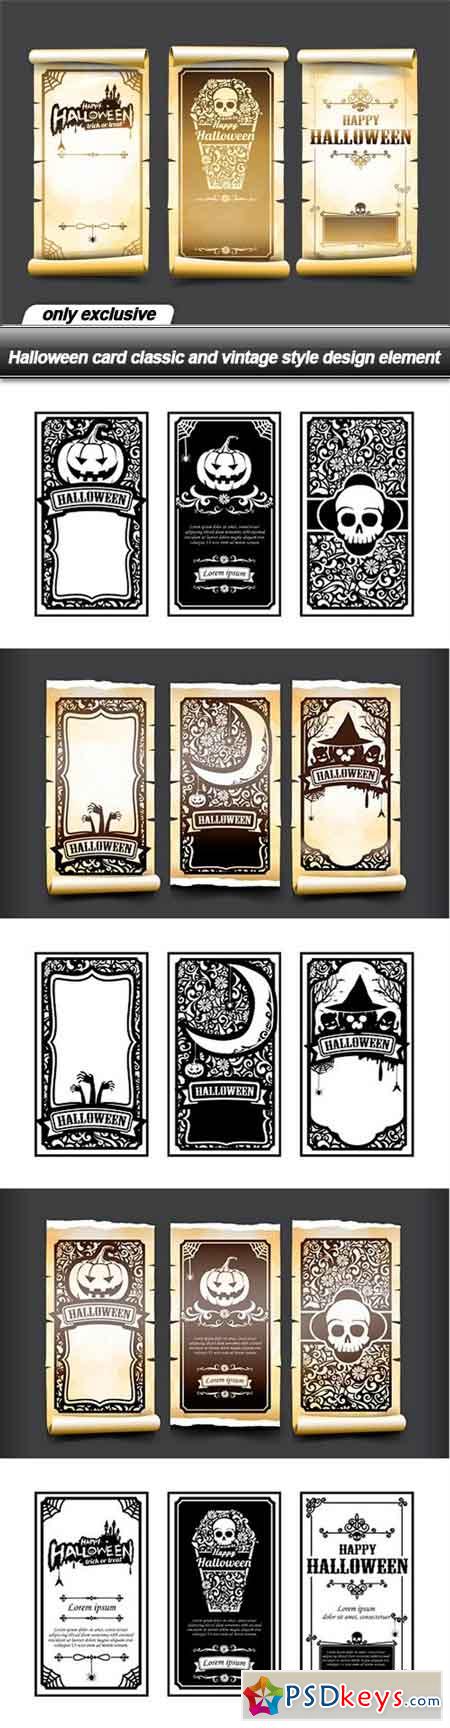 Halloween card classic and vintage style design element - 6 EPS